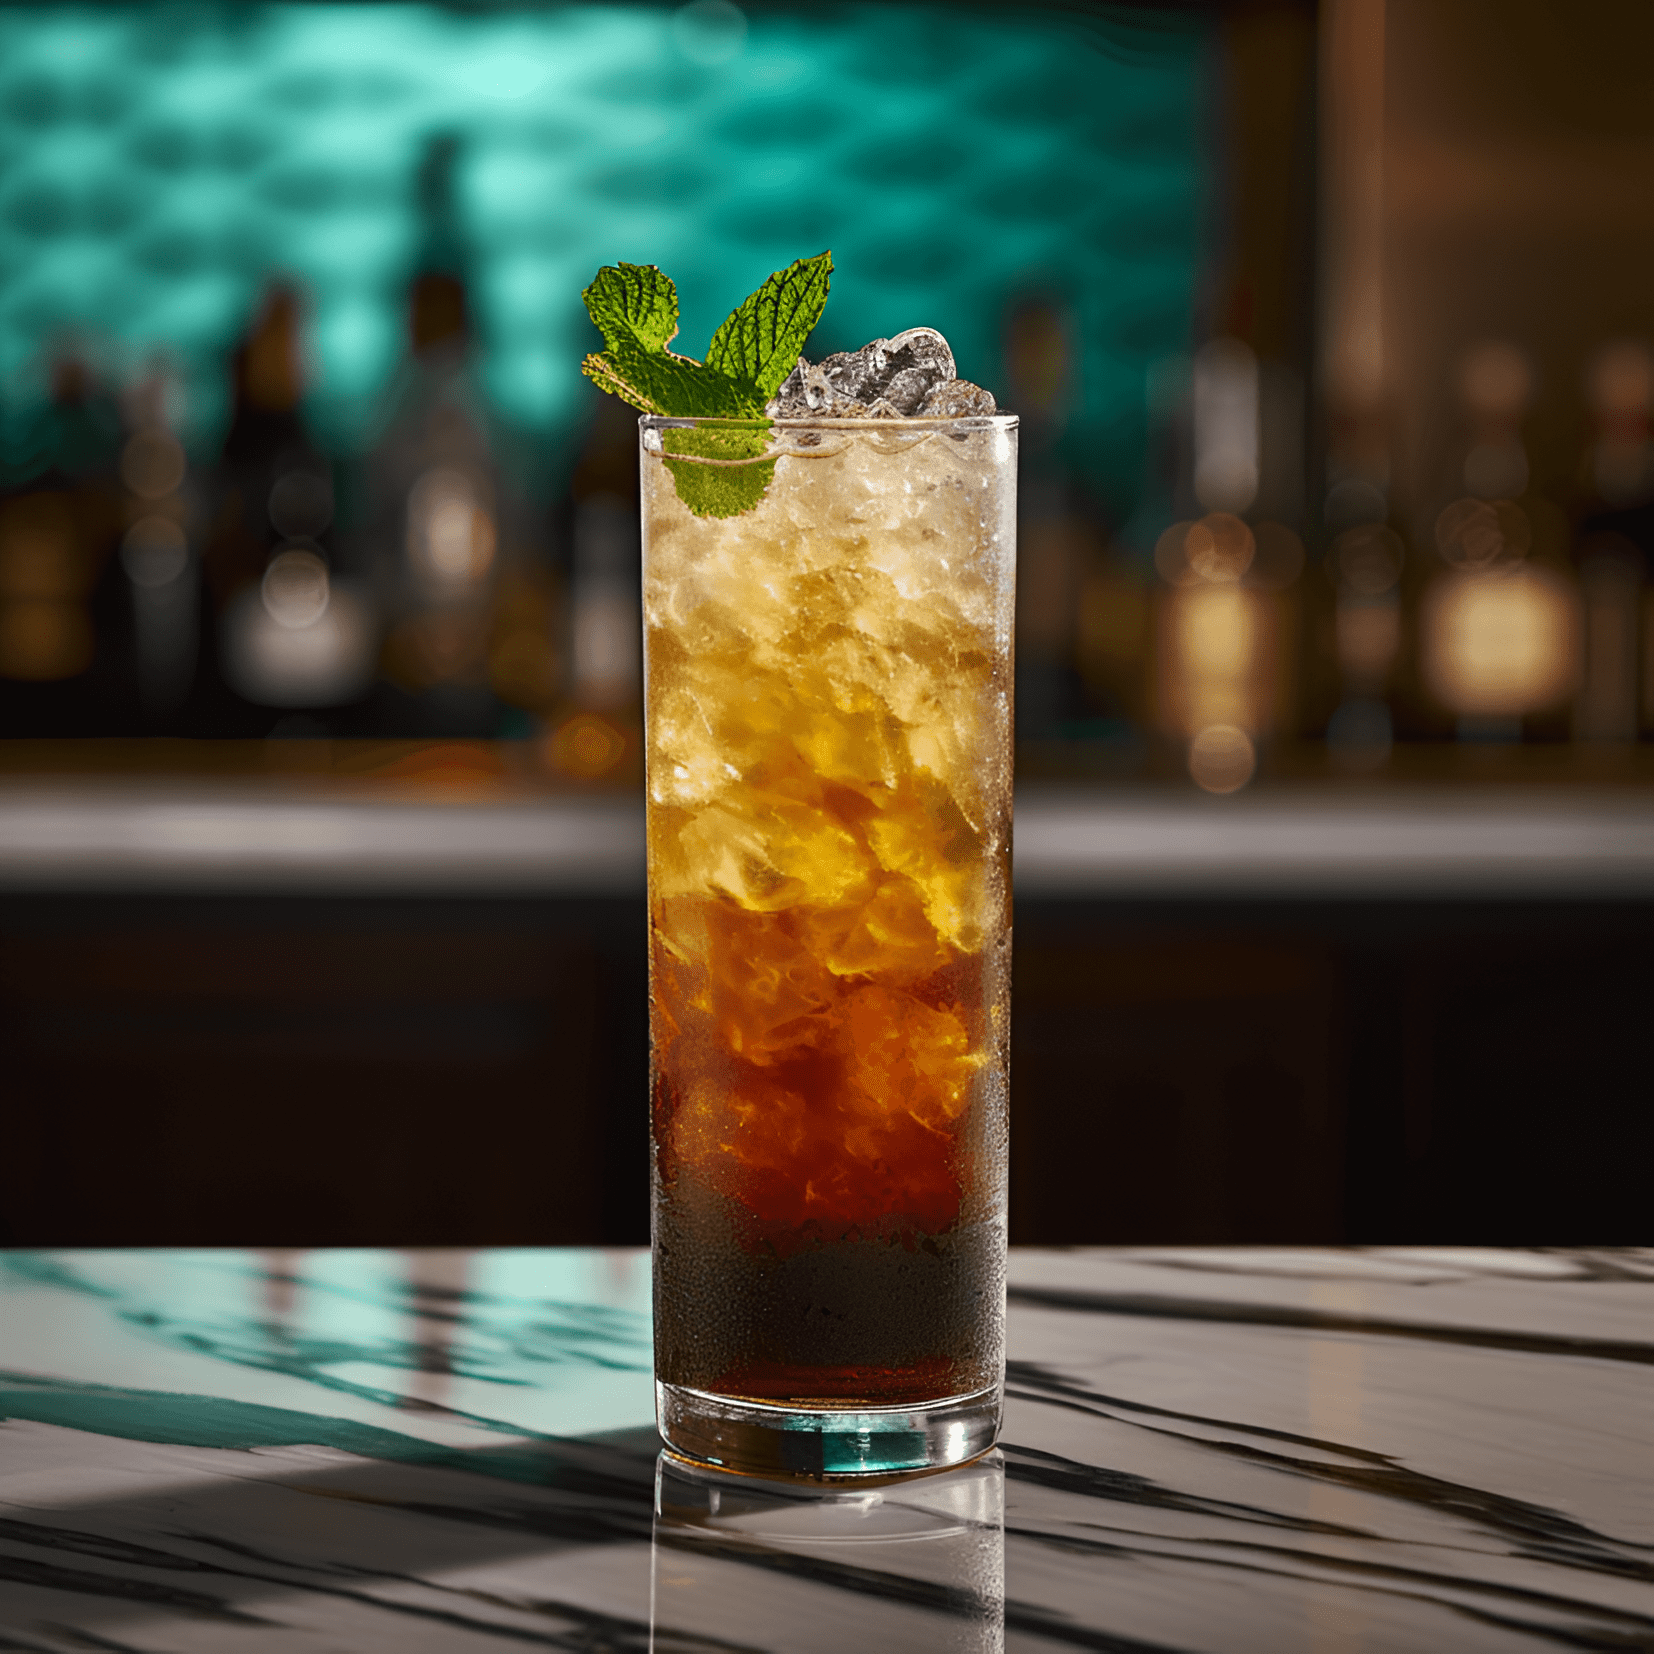 The Queen's Park Swizzle is a well-balanced cocktail with a mix of sweet, sour, and strong flavors. It has a refreshing minty taste, combined with the sweetness of the sugar and the tanginess of the lime. The rum adds a strong, bold backbone to the drink, making it a satisfying and invigorating experience.